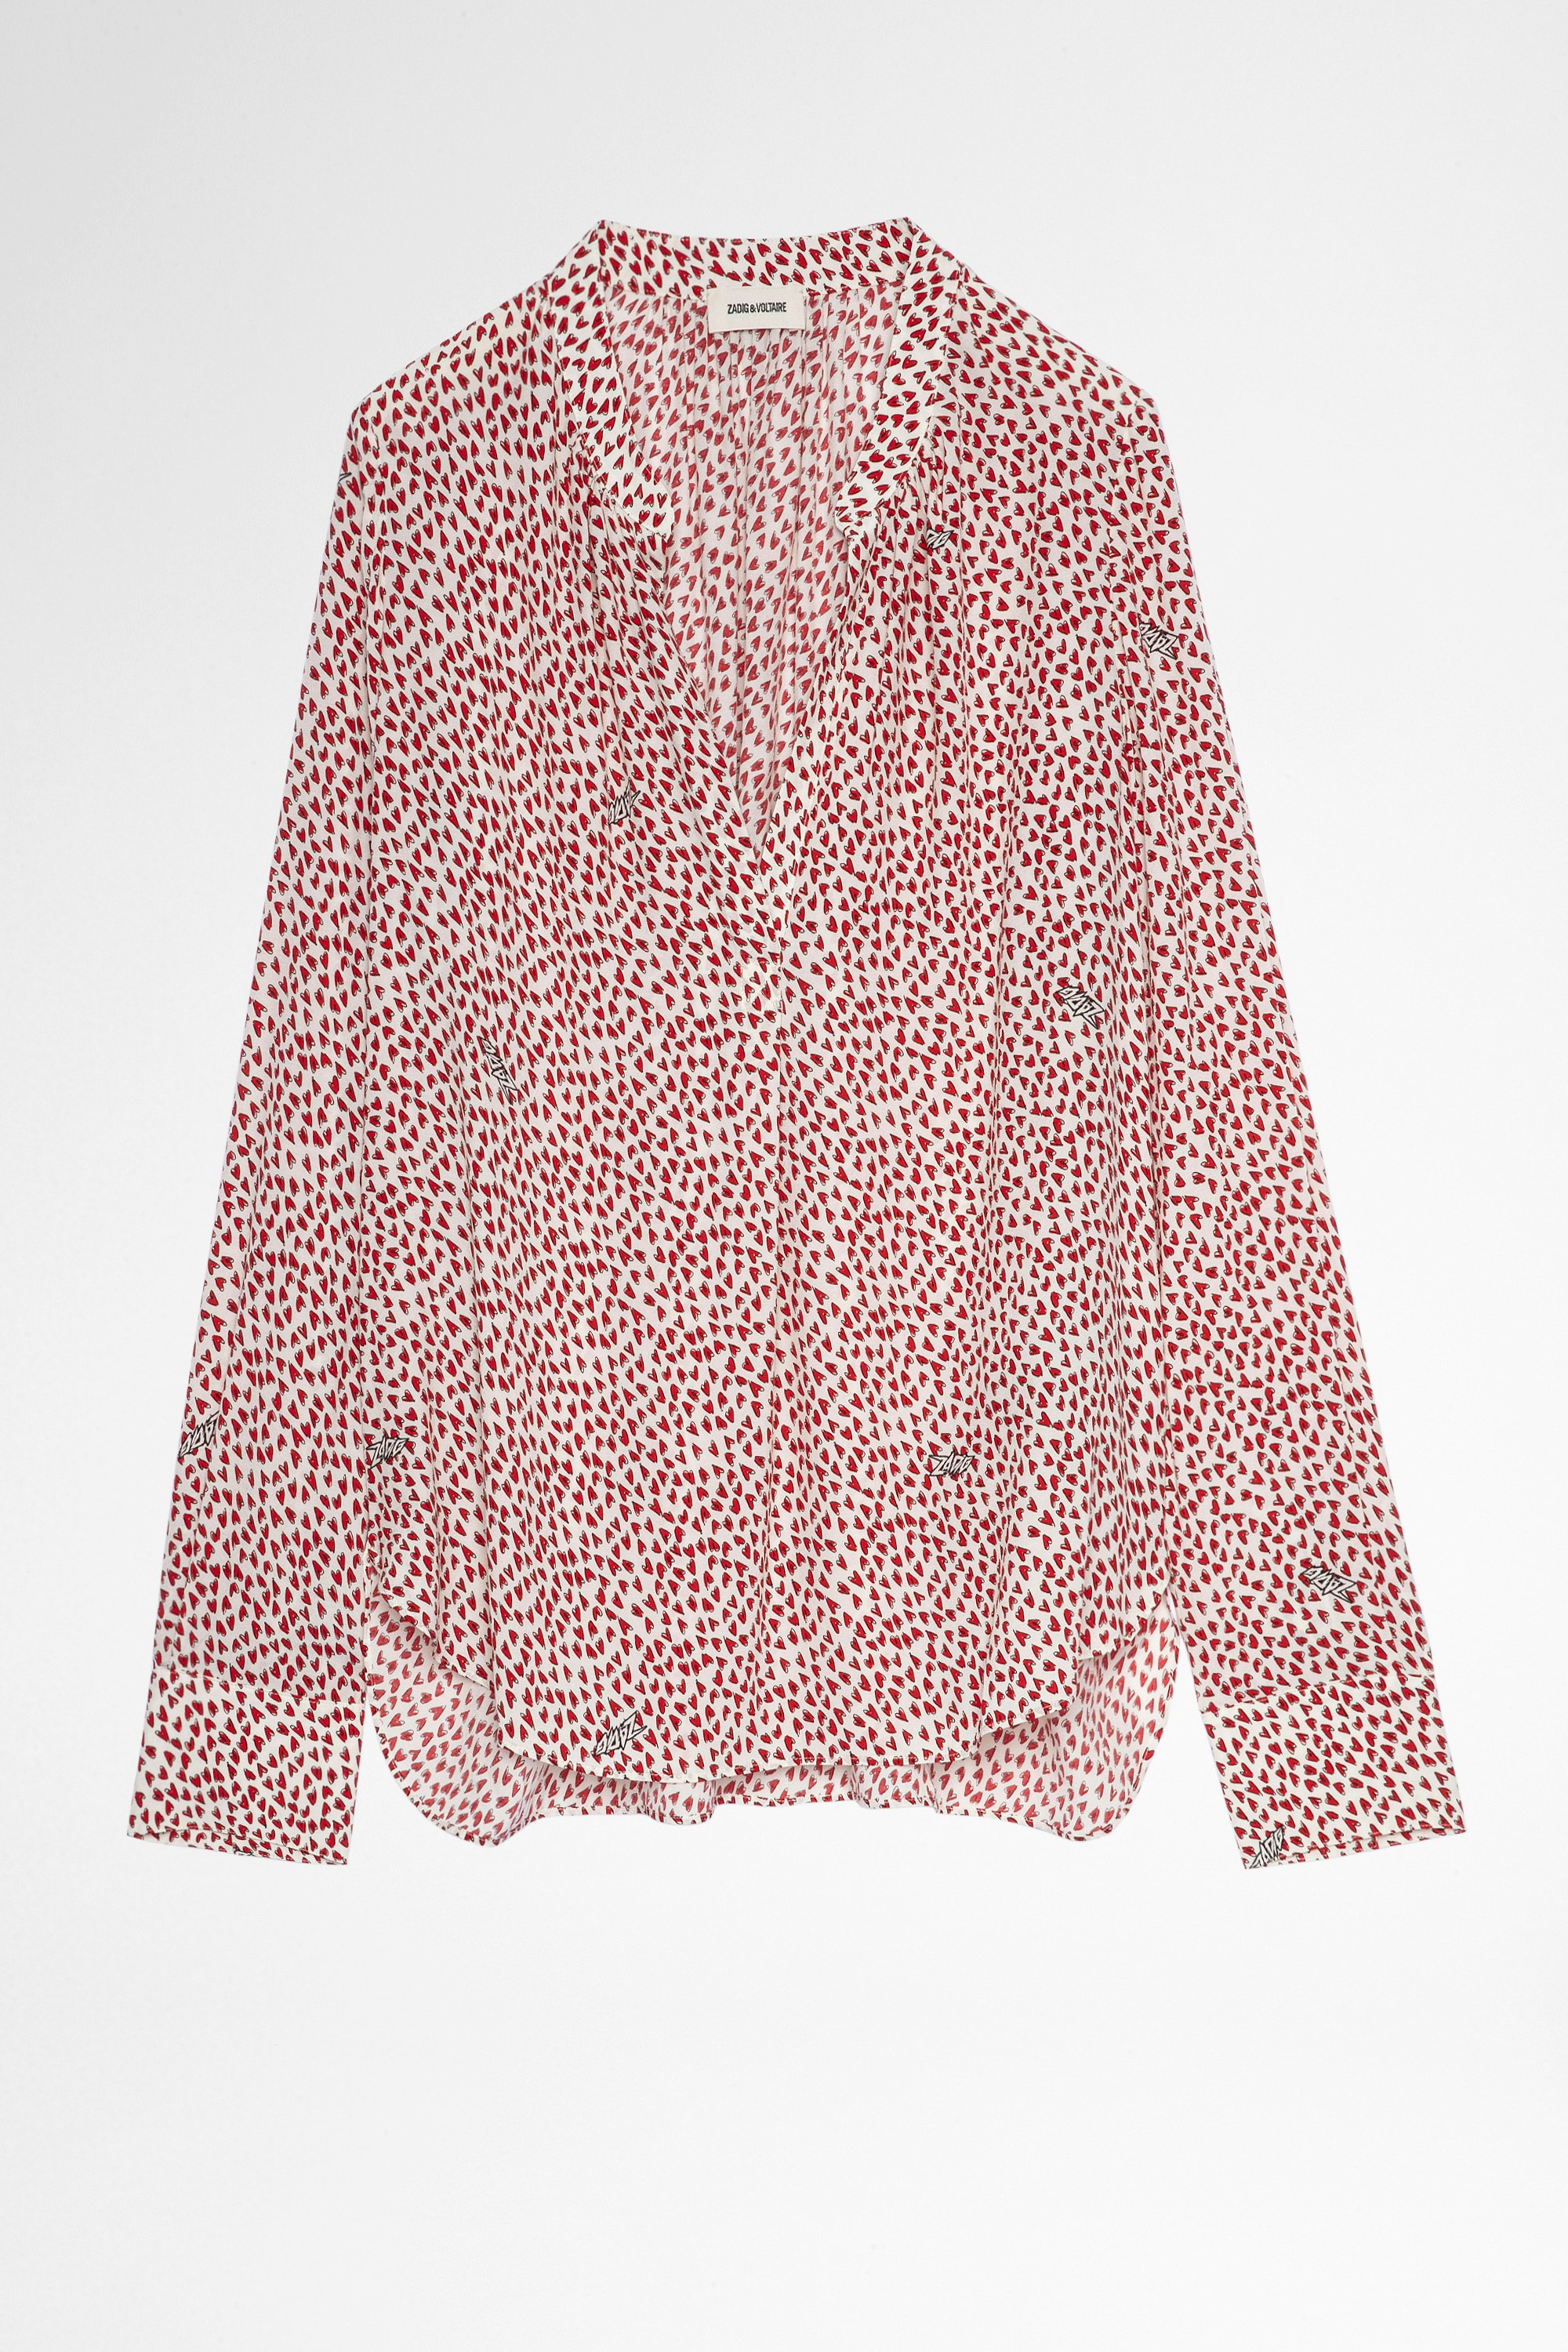 Tink ZV Crush Blouse Women's long-sleeved ecru blouse with heart print. Made with fibers from sustainably managed forests.